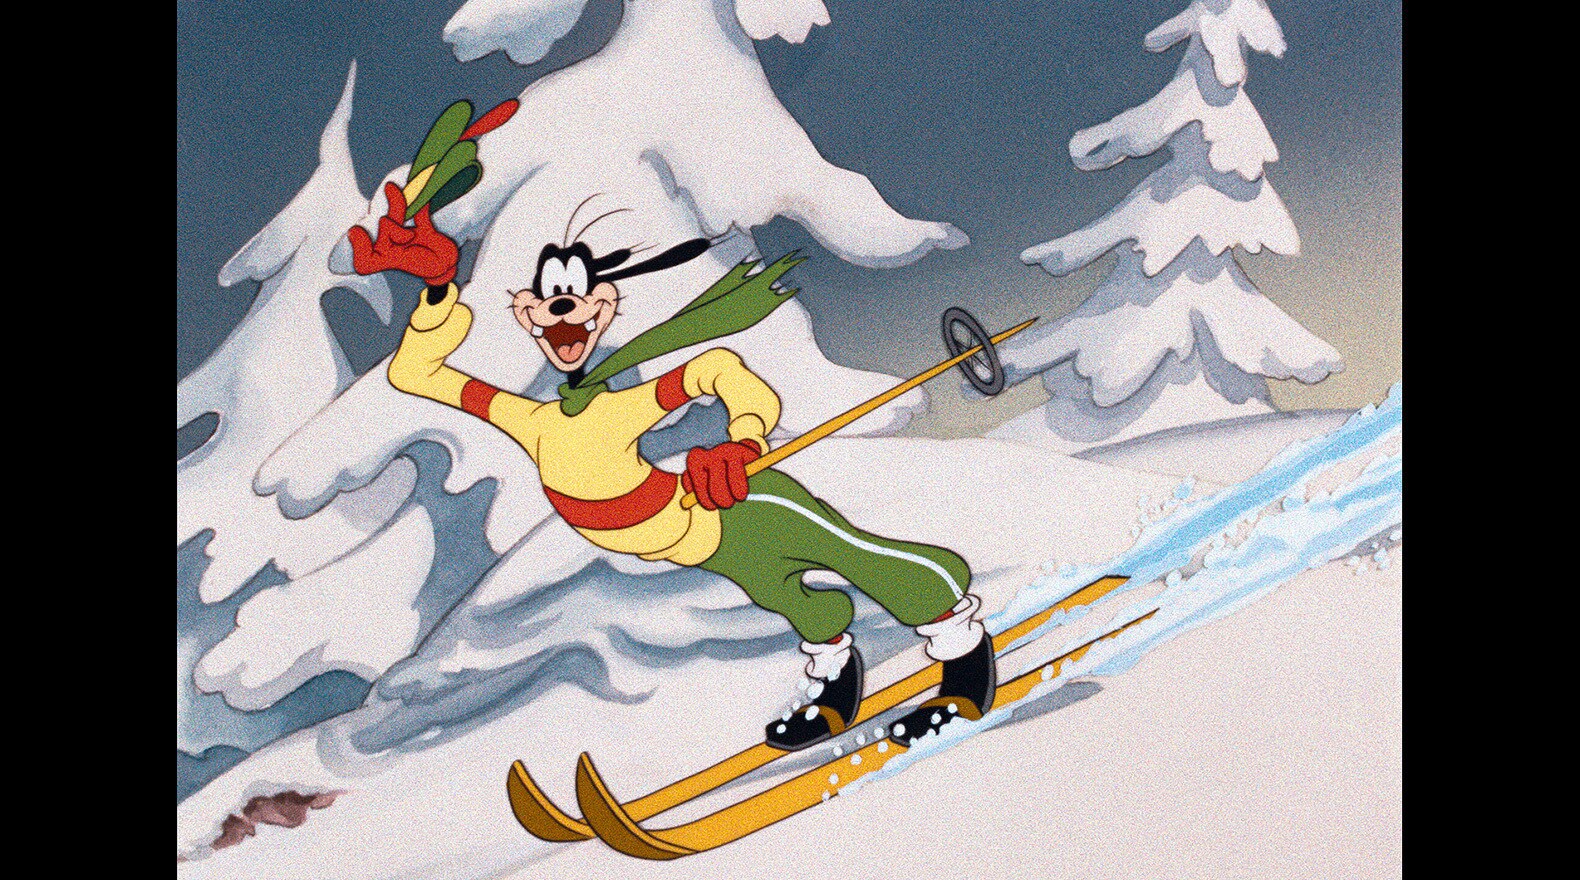 Goofy shows off his skills on the slopes.